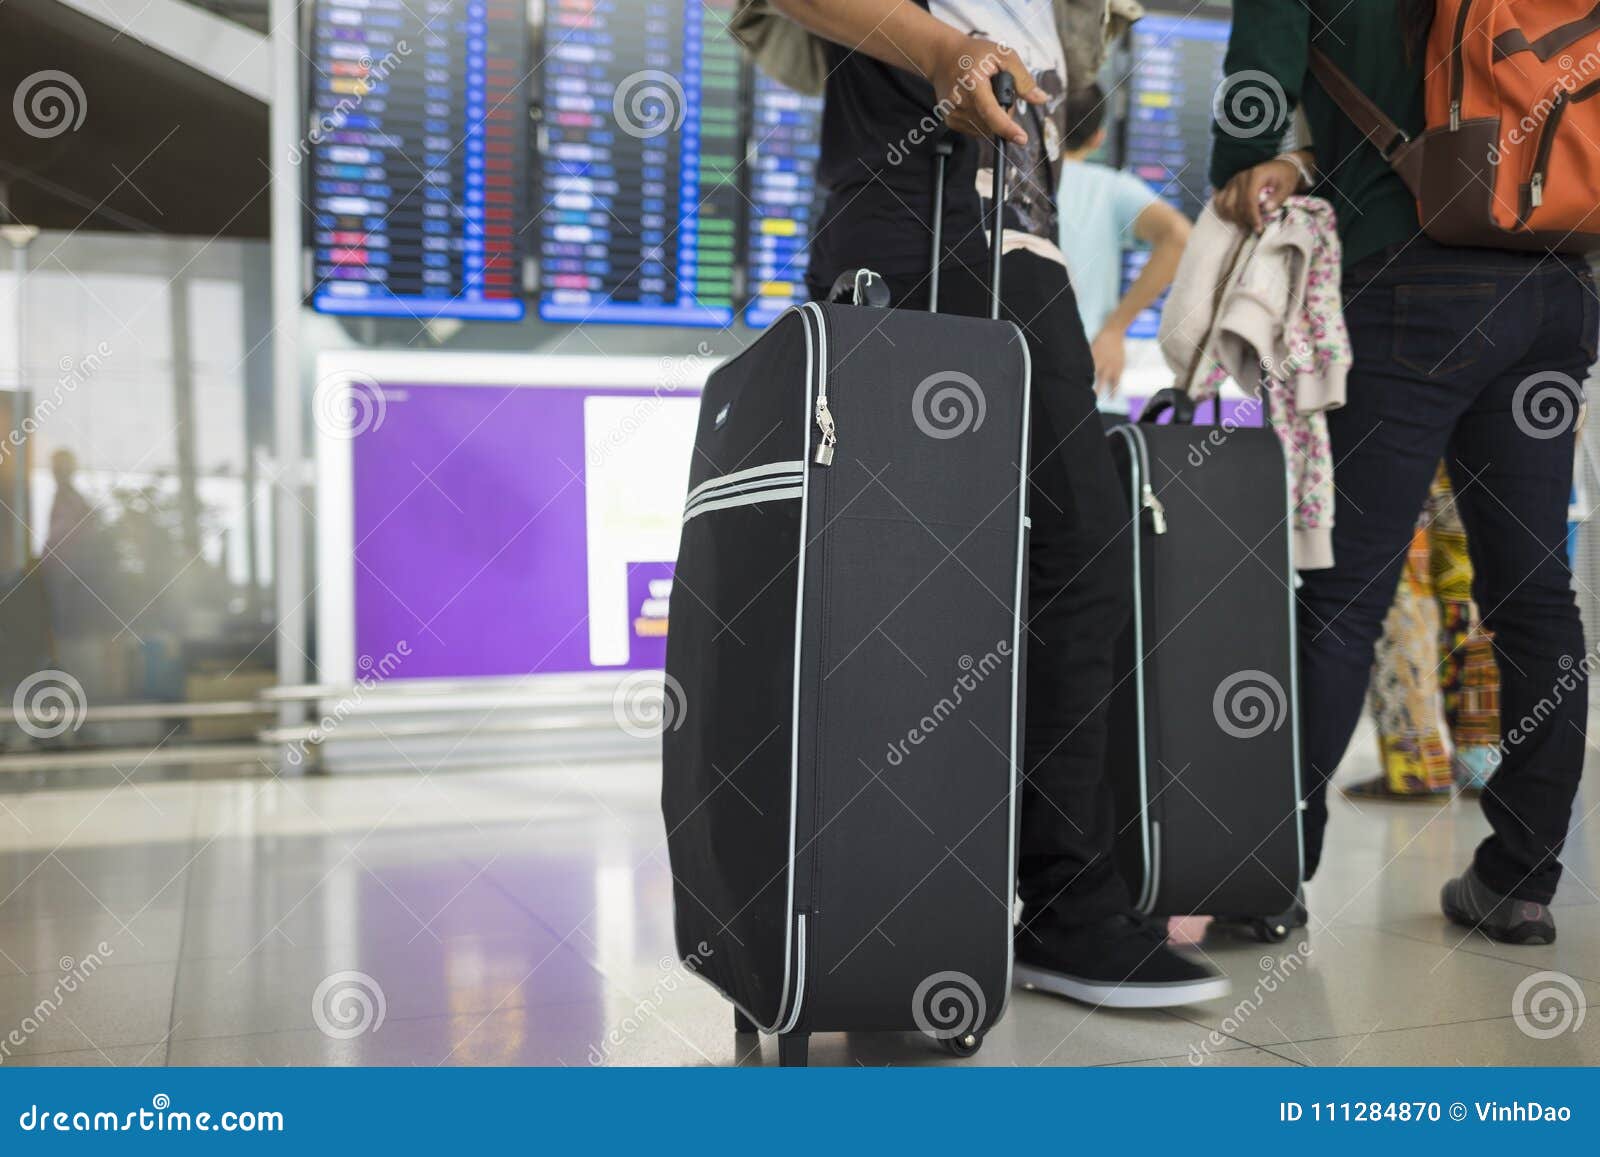 travelling suitcase against flight information board on background. concept of travel by airplane